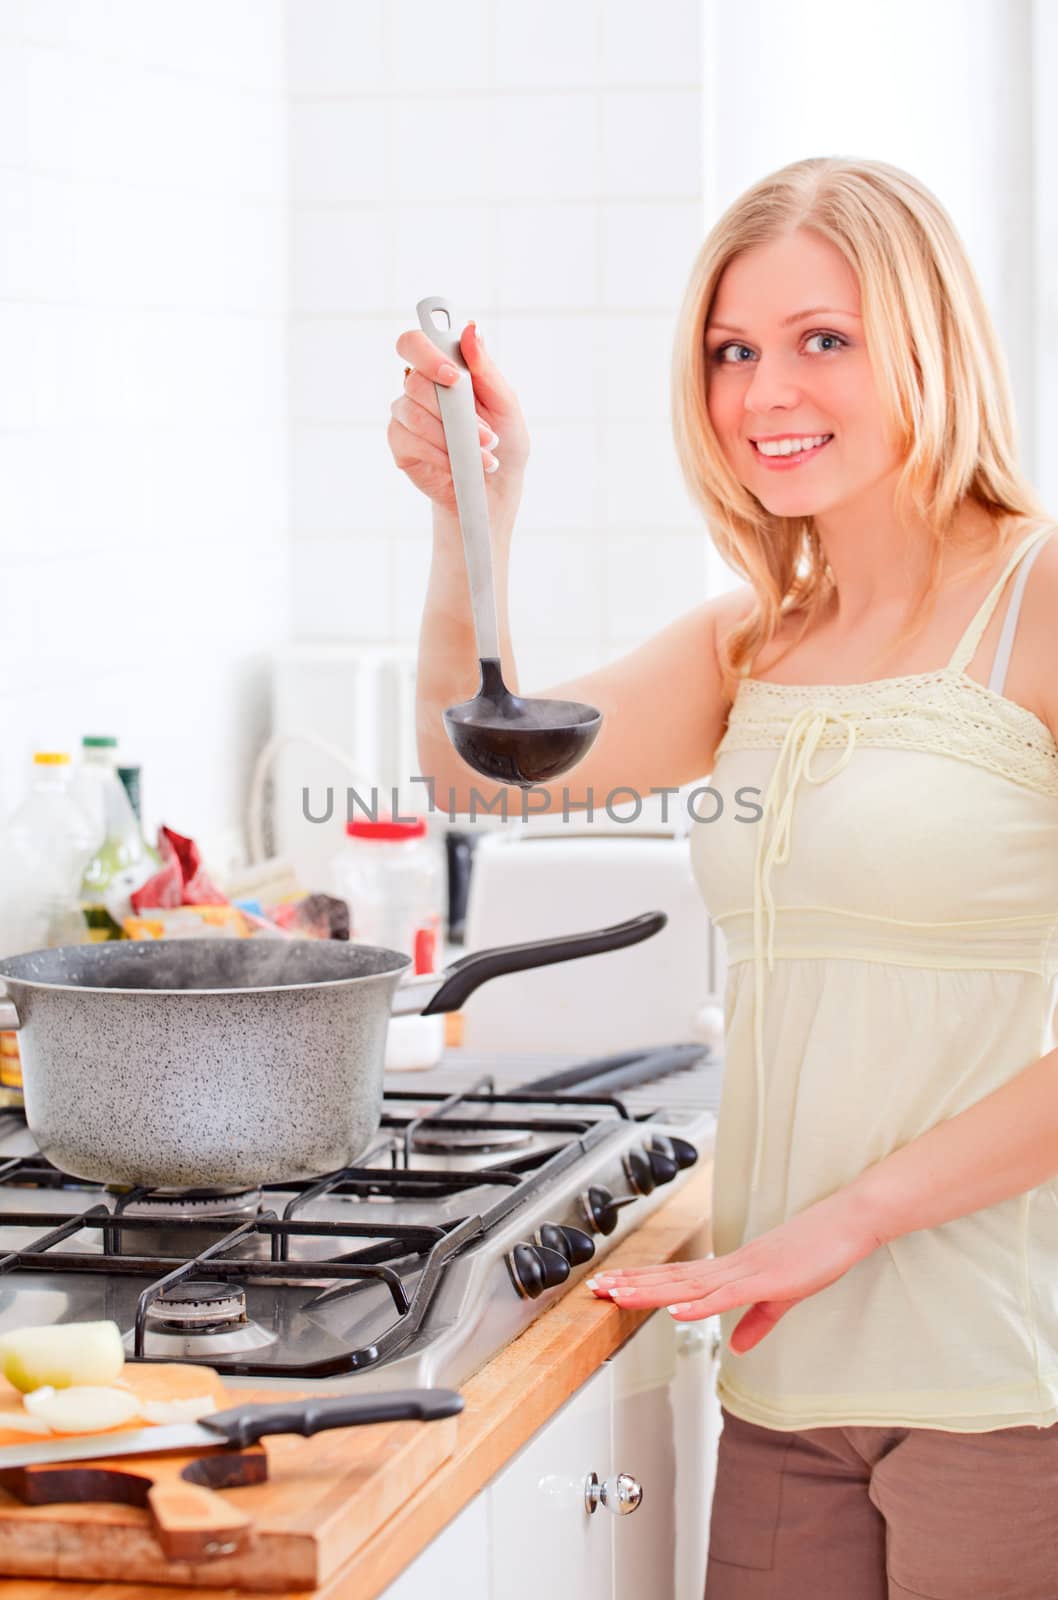 Cute Girl Cooking by petr_malyshev